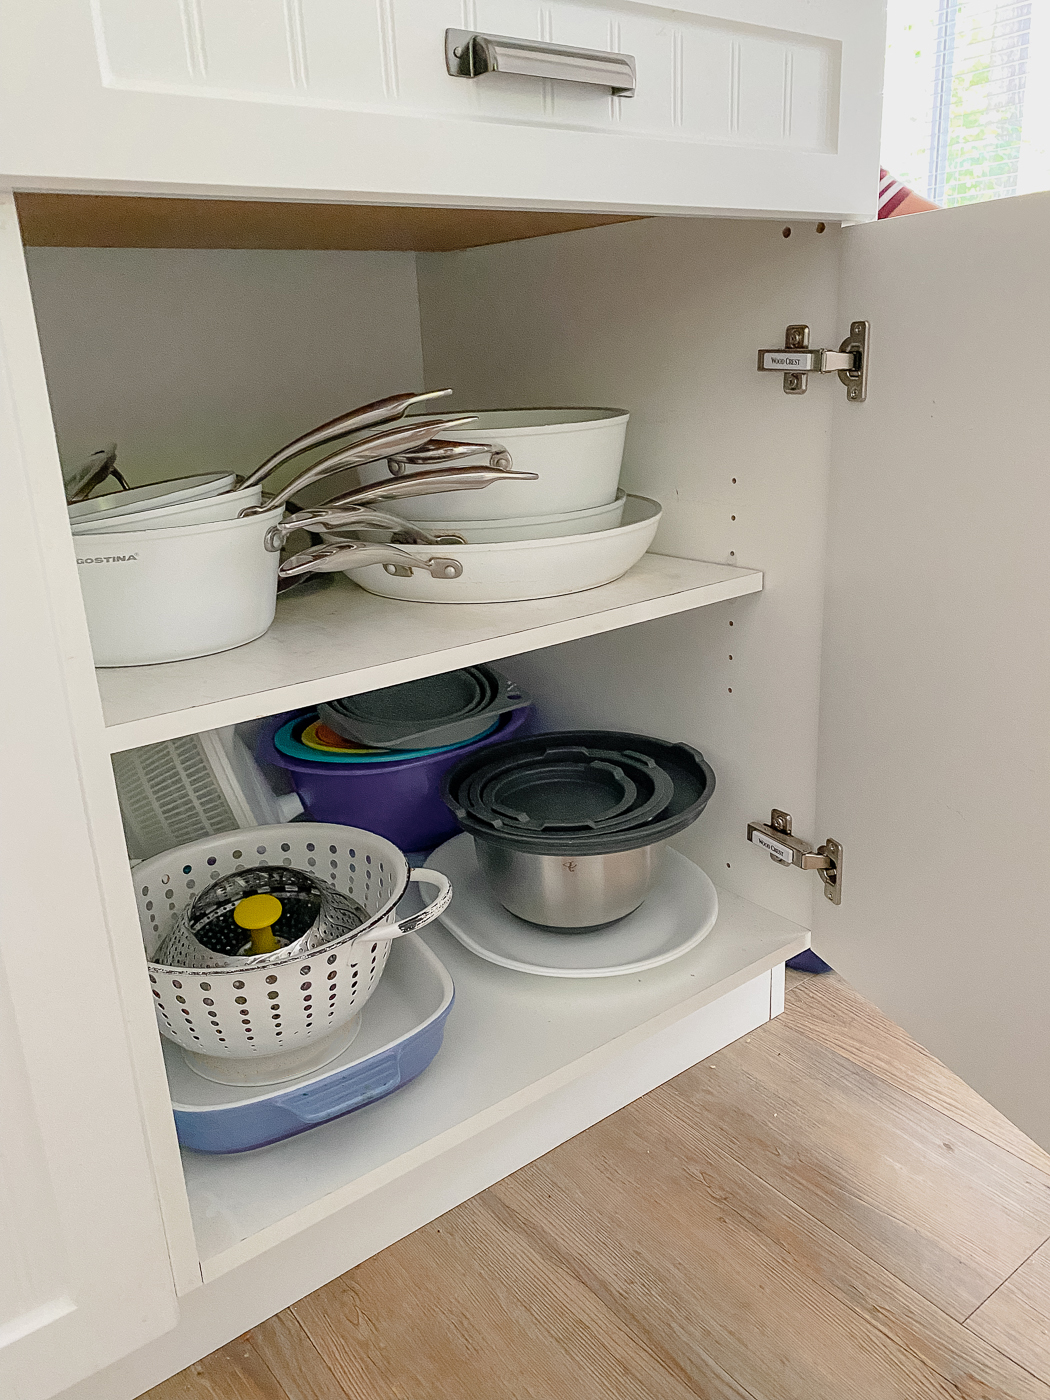 How to Organize Pots and Pans - Kitchen Cabinet Storage Ideas